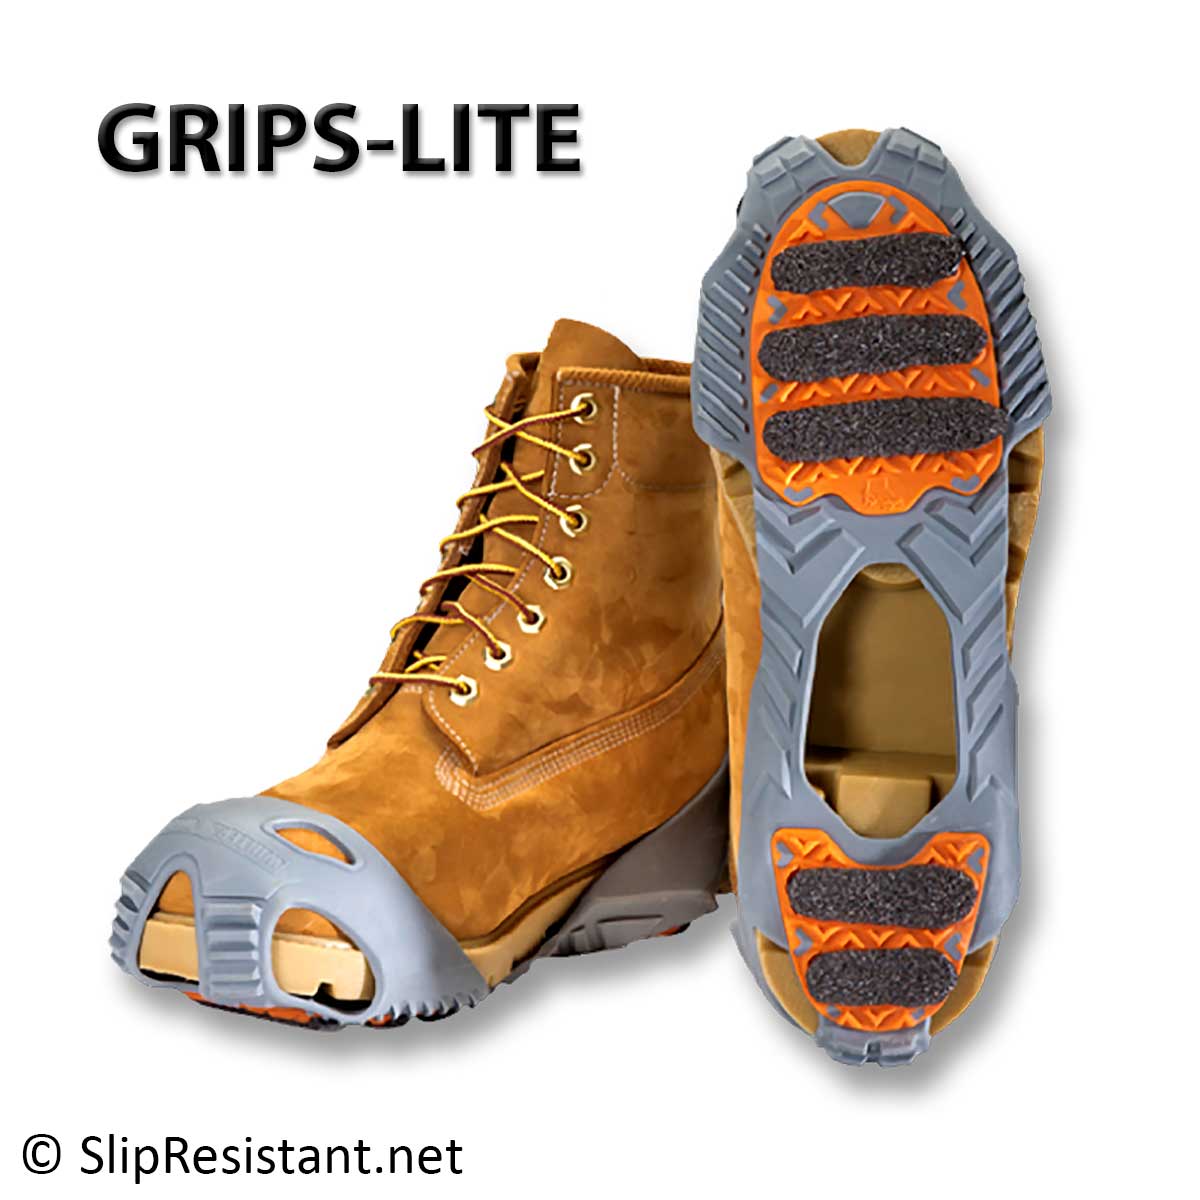 GRIPS-LITE Non-Sparking Ice Cleats